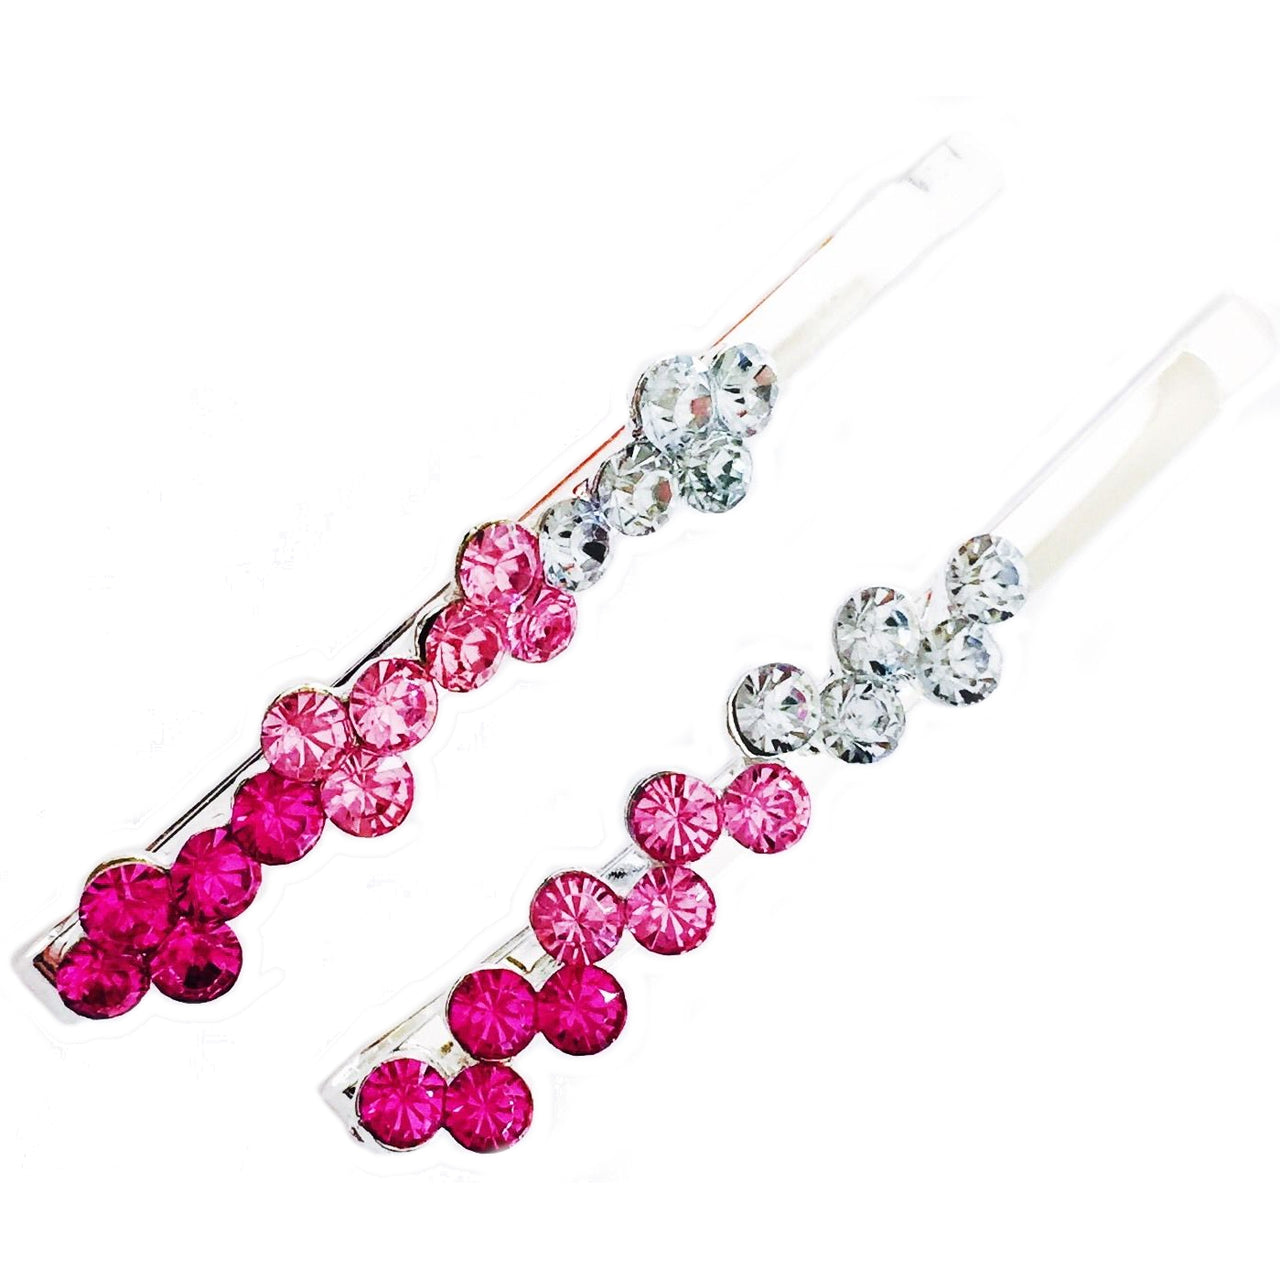 Simple Floral Bobby Pin Pair Rhinestone Crystal silver base clear Pink, Bobby Pin - MOGHANT